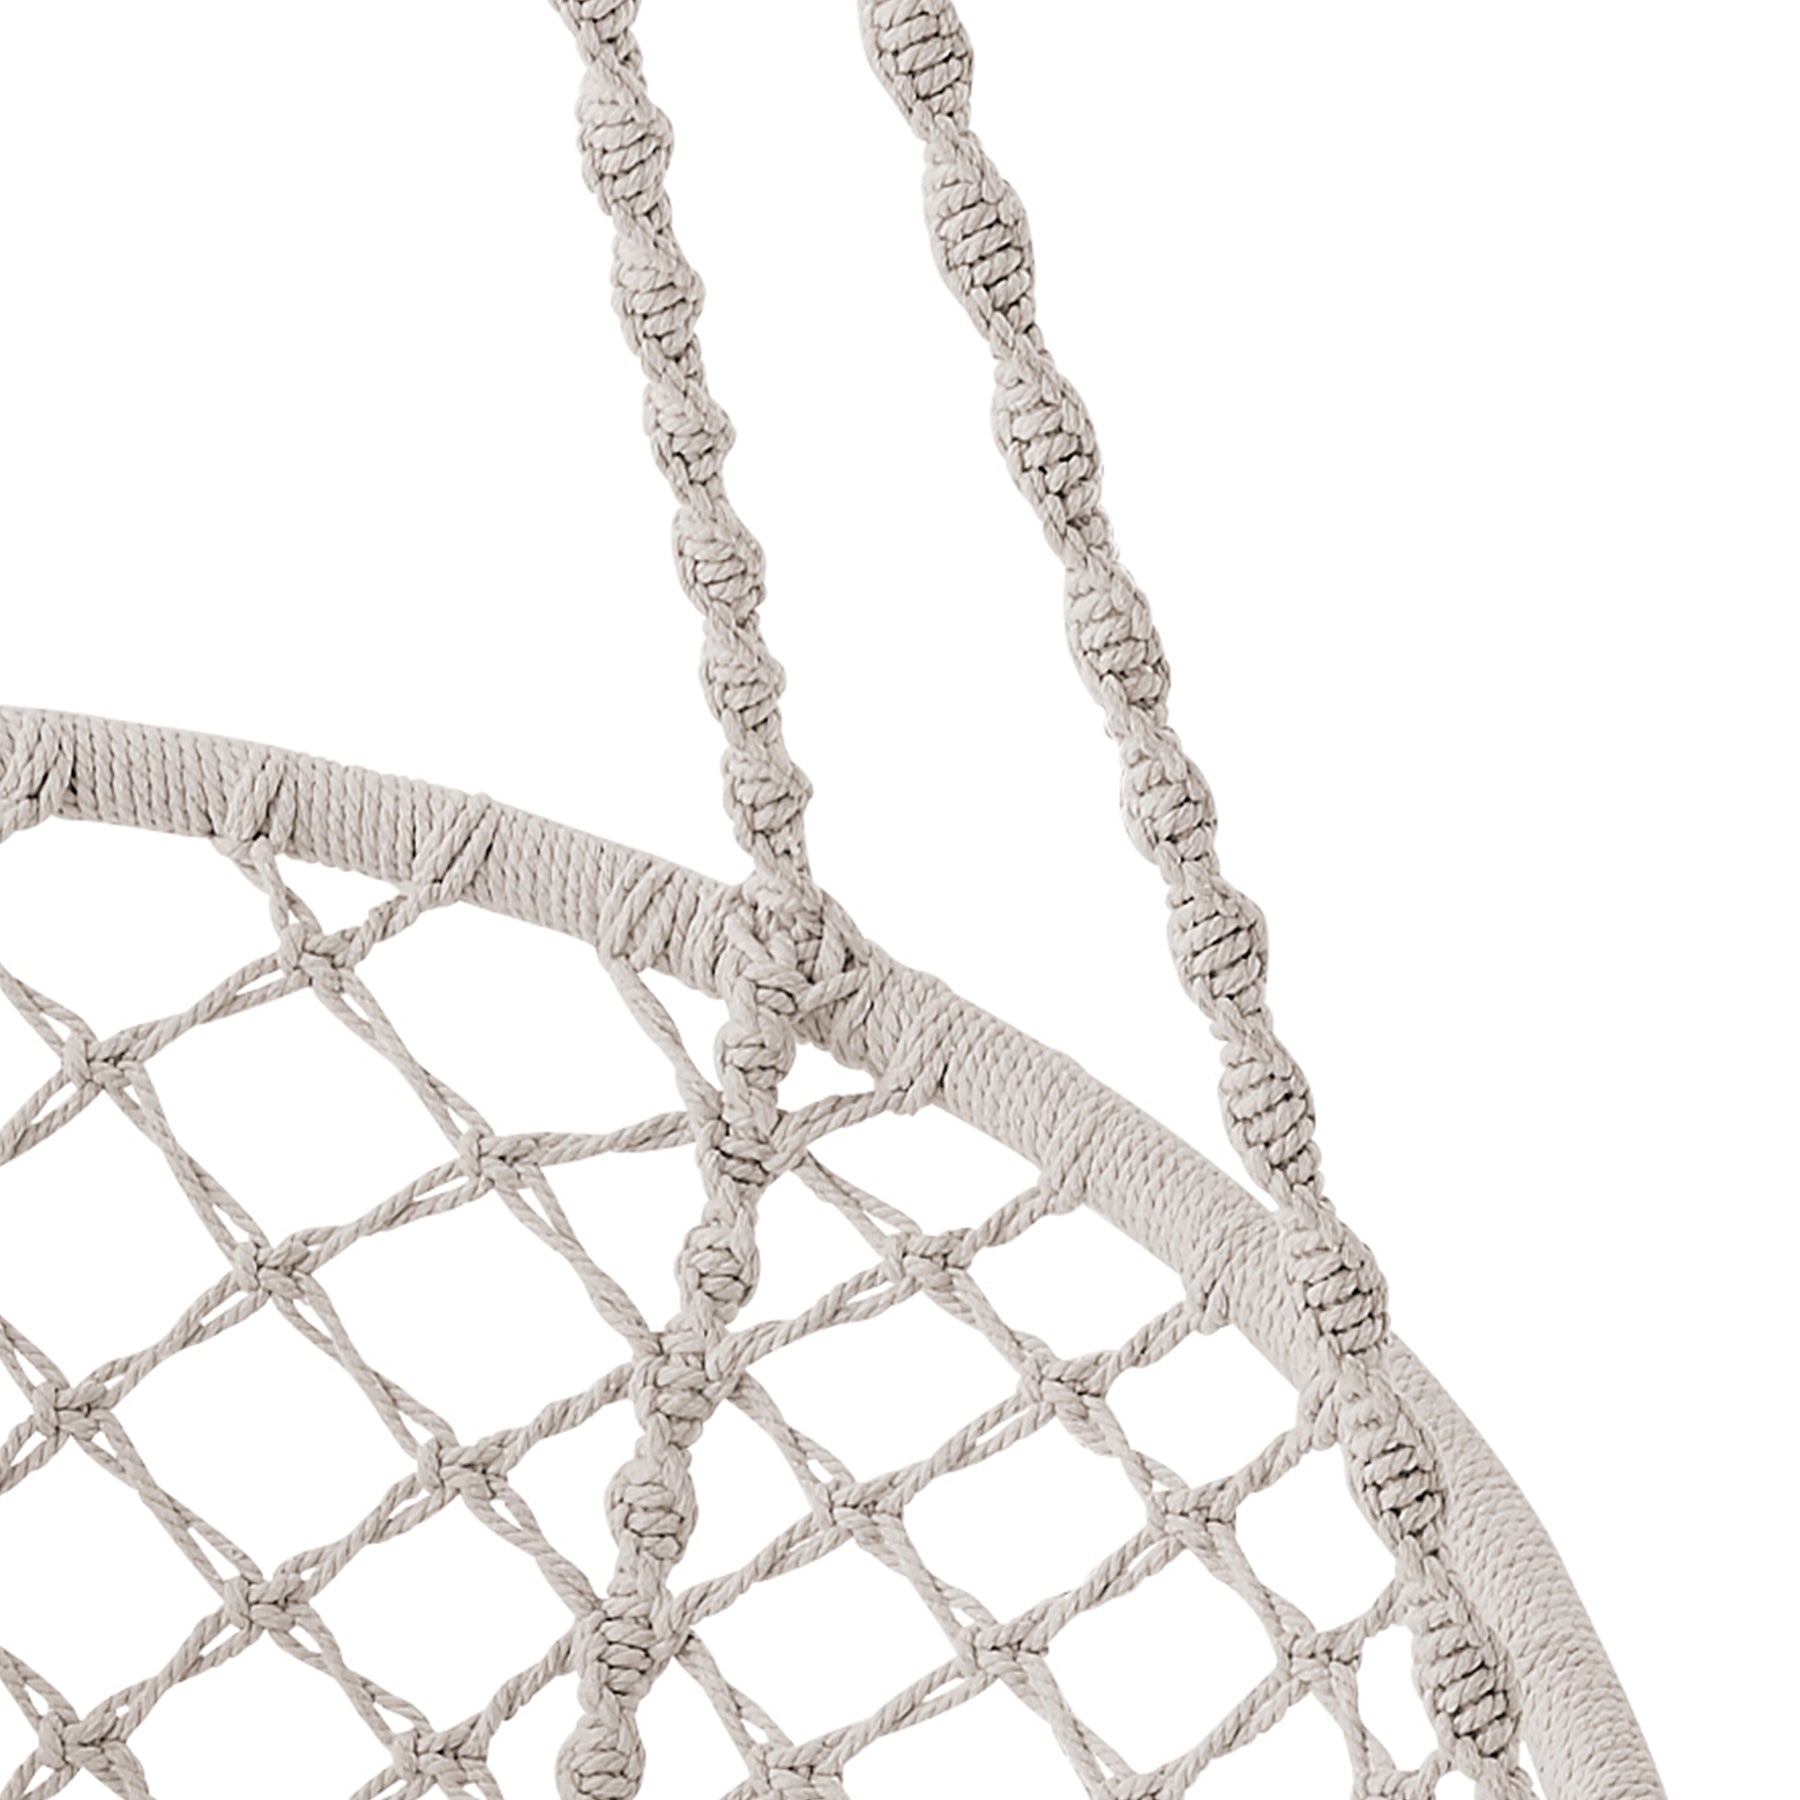 Close-up of the Bliss Hammocks 31.5-inch Wide Macramé Swing Chair showing the ropes the chair hangs from.